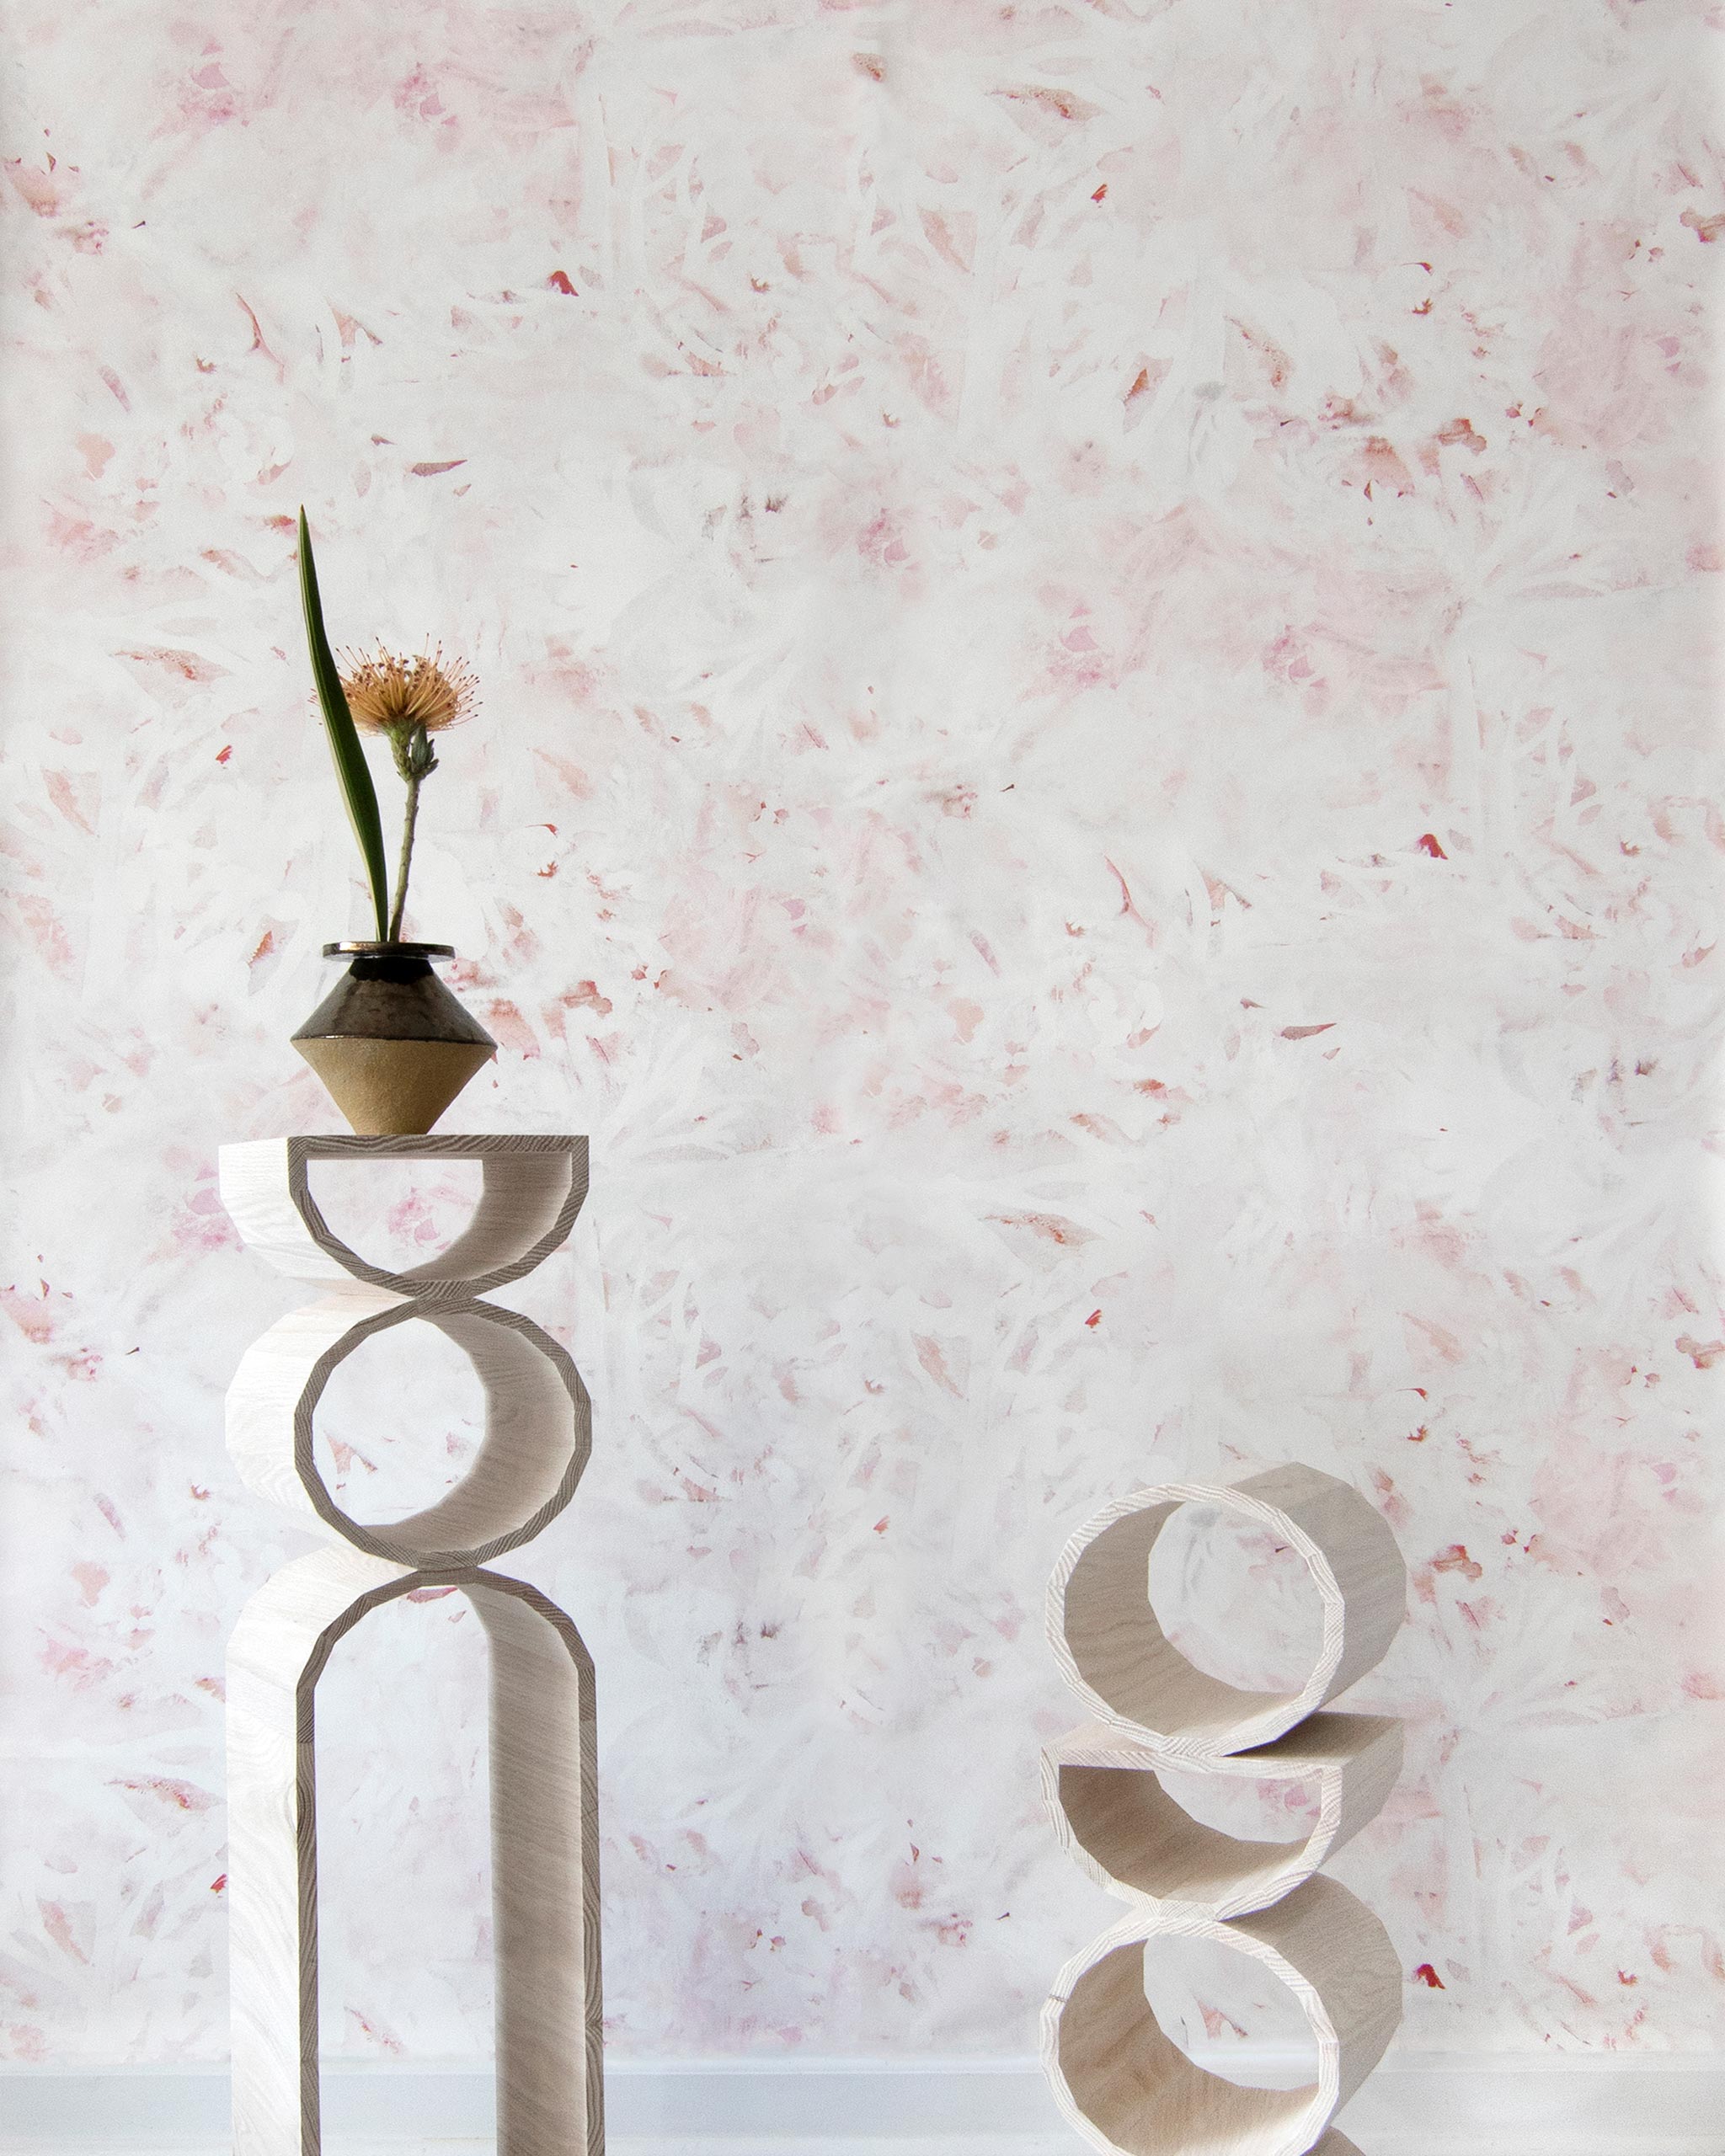 Modernist end tables stand in front of a wall papered in an abstract painted print in shades of pink, red and white.